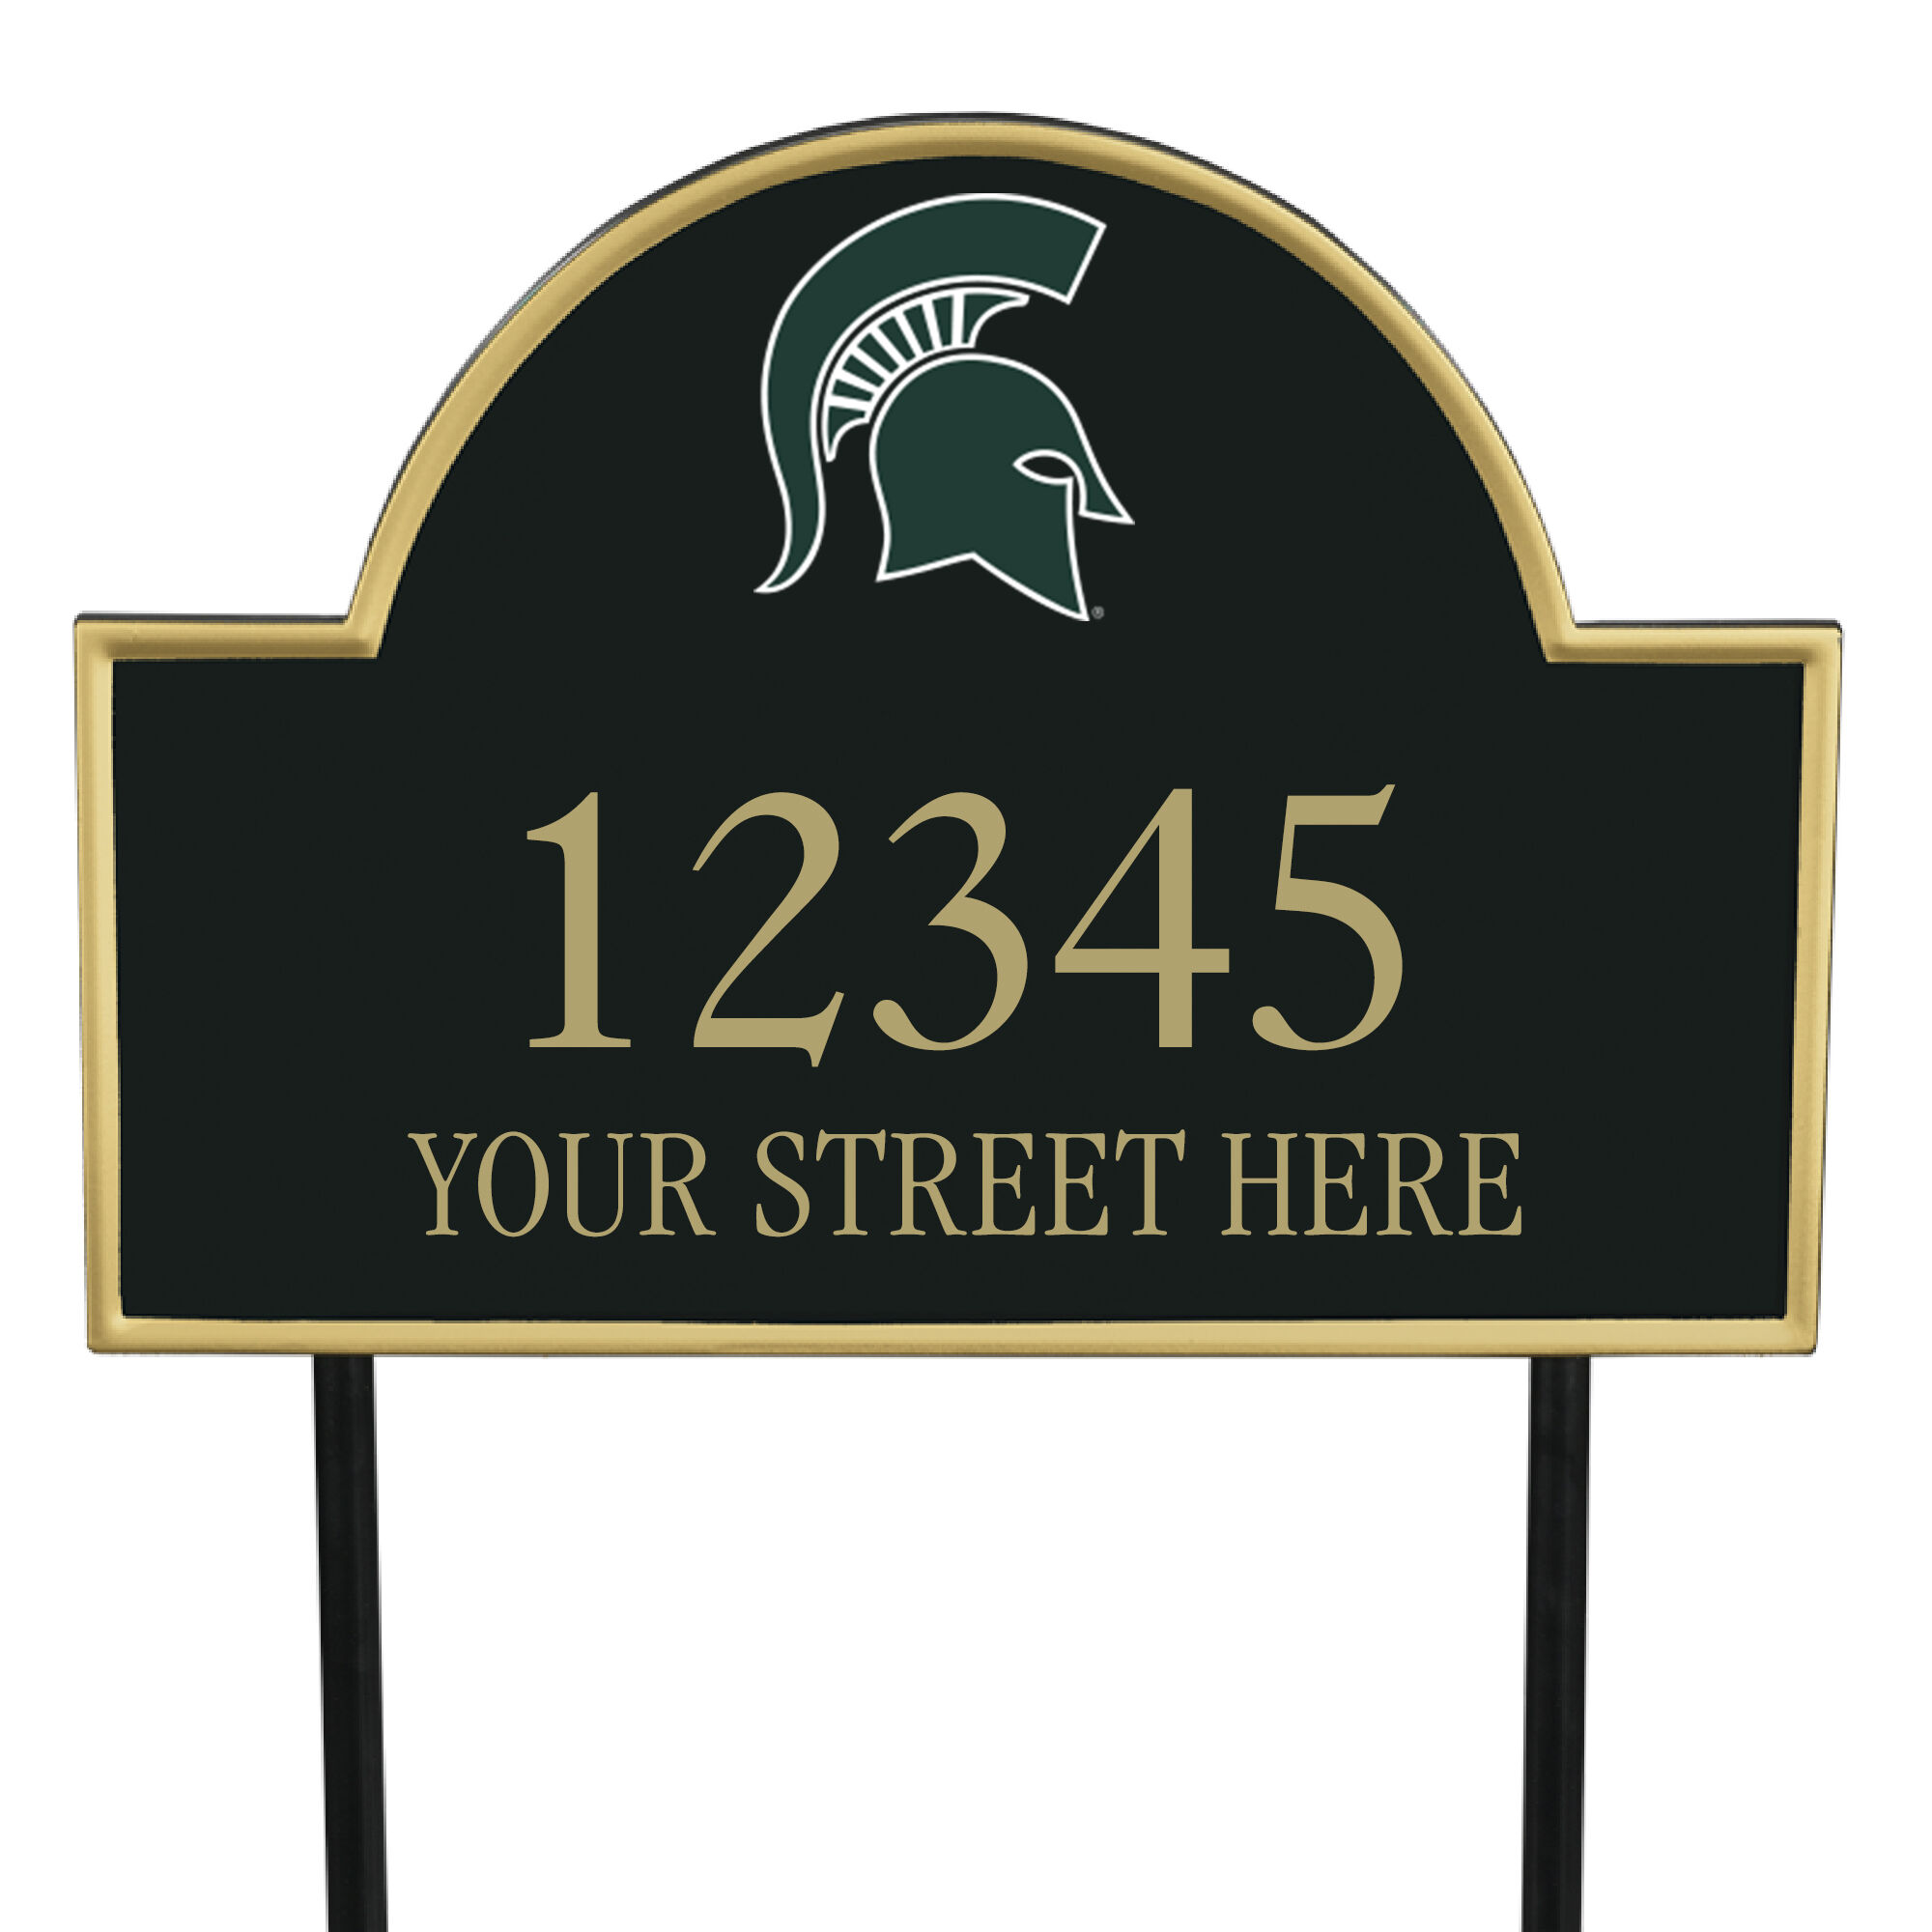 The College Personalized Address Plaque 5716 0384 b Michigan State